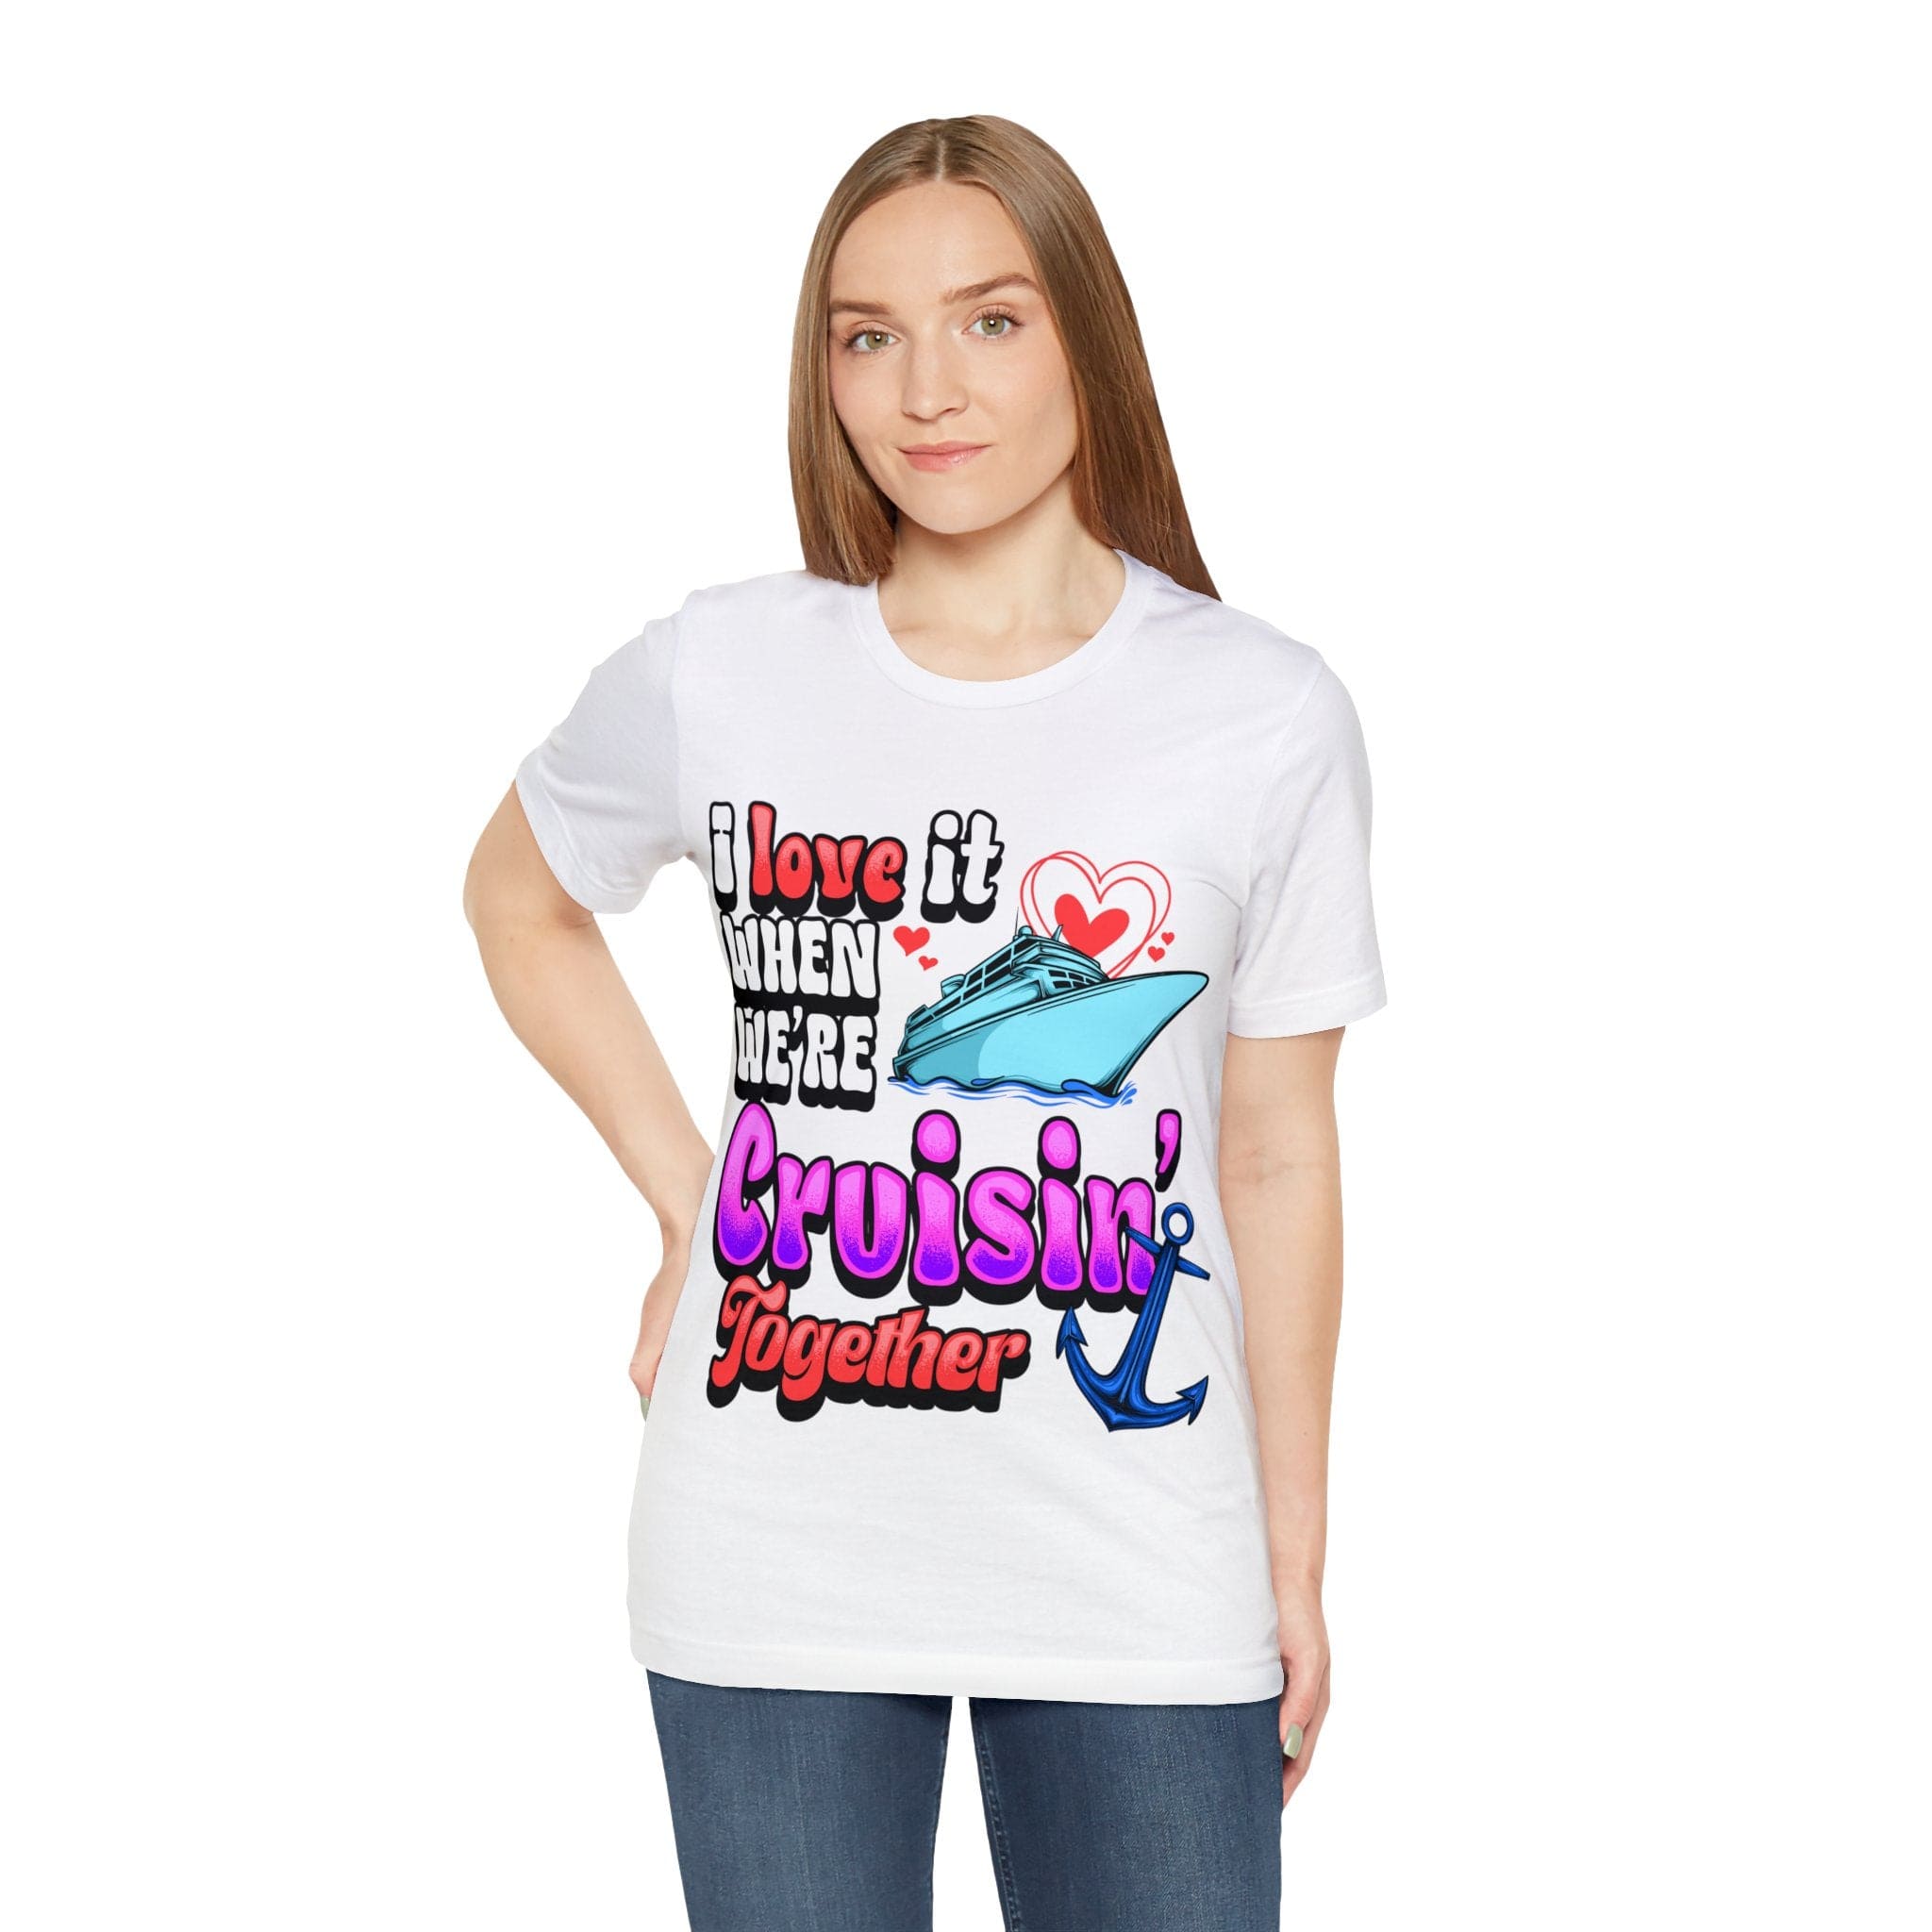 Couples Cruisin Deluxe Tee For Your Next Cruise